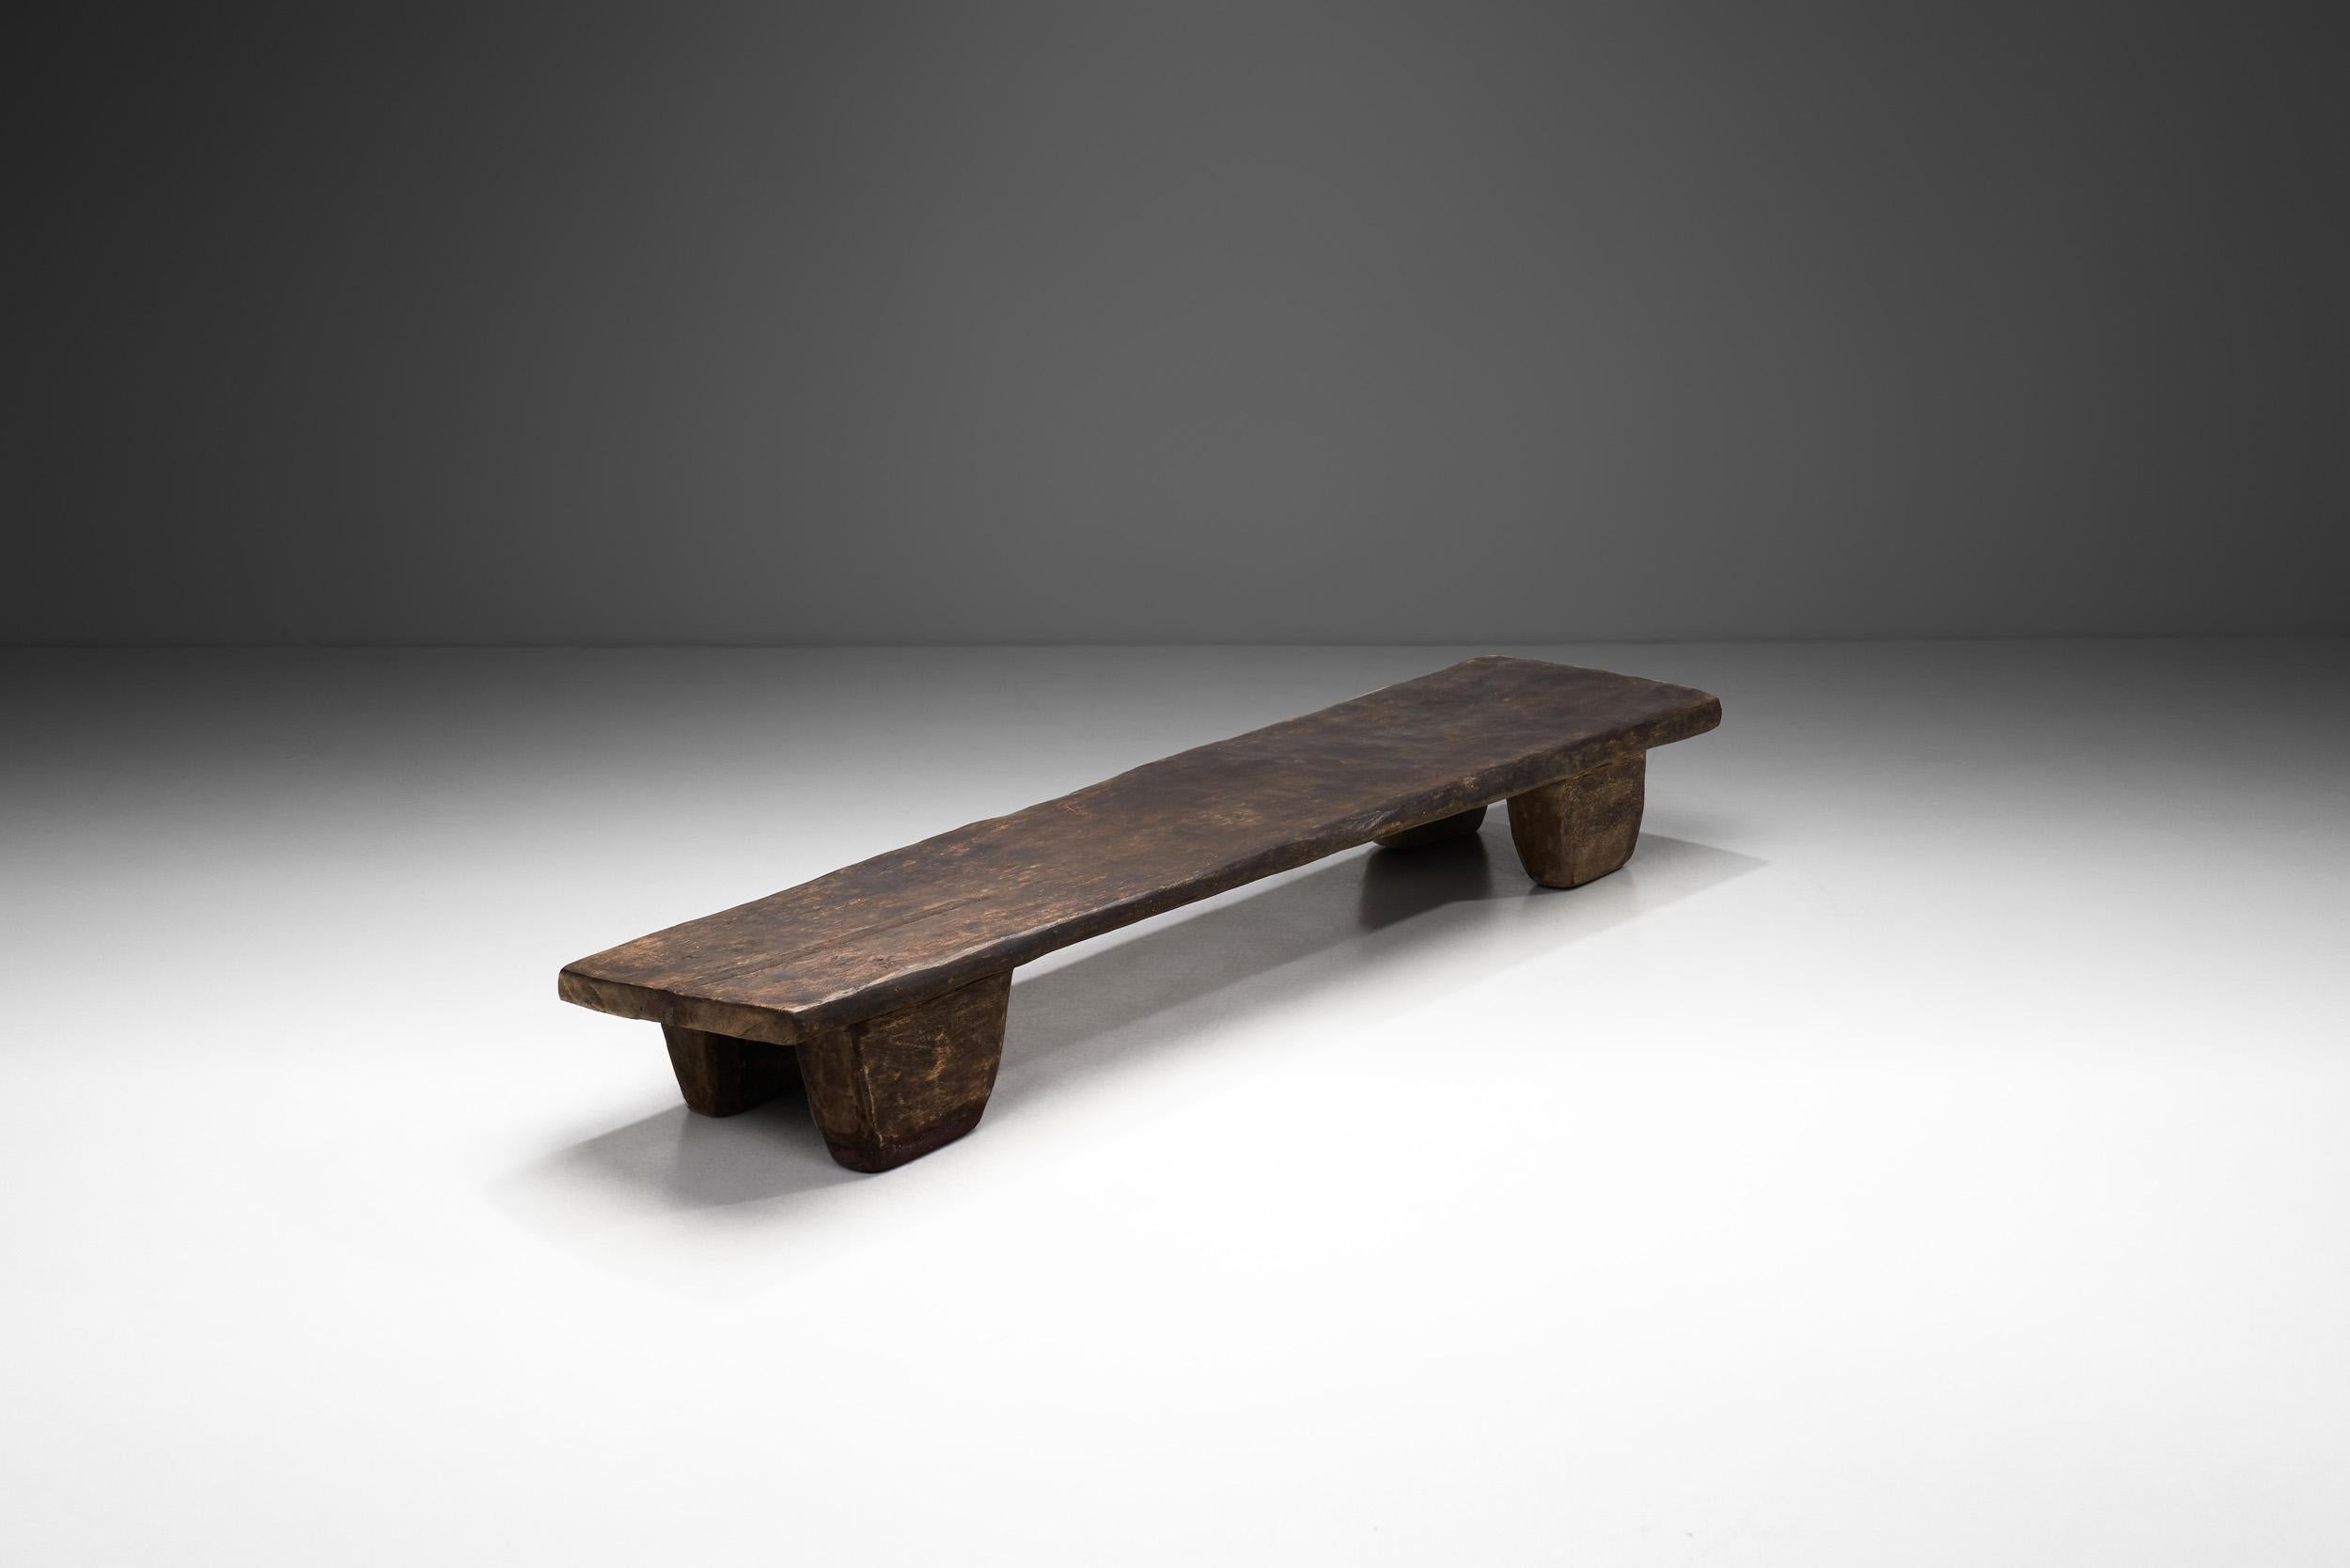 Brutalist Rustic Solid Wood Naga Coffee Table, India Early 20th Century For Sale